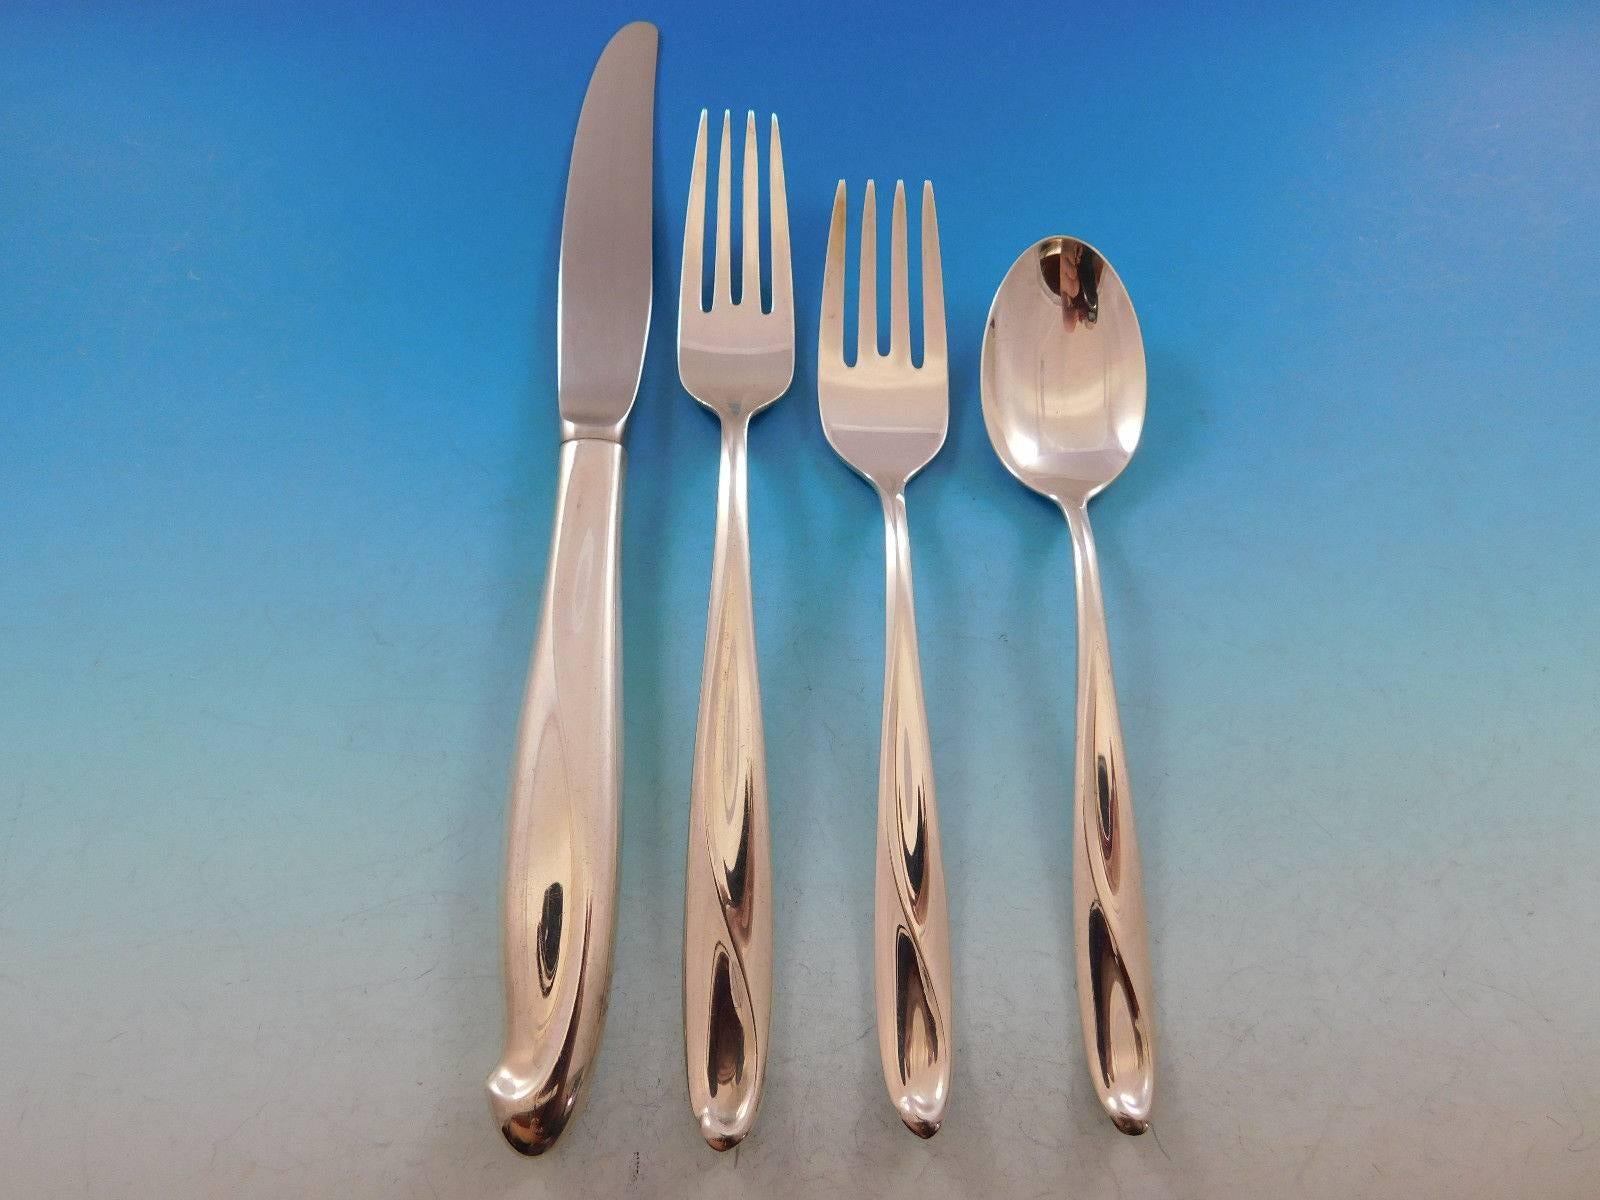 Mid-Century Modern silver sculpture by Reed and Barton sterling silver flatware set, 36 pieces. See photo of Reed & Barton's 1954 advertisement, as illustrated in Modernism in American Silver by Stern book. Great starter set! This set includes:

Six